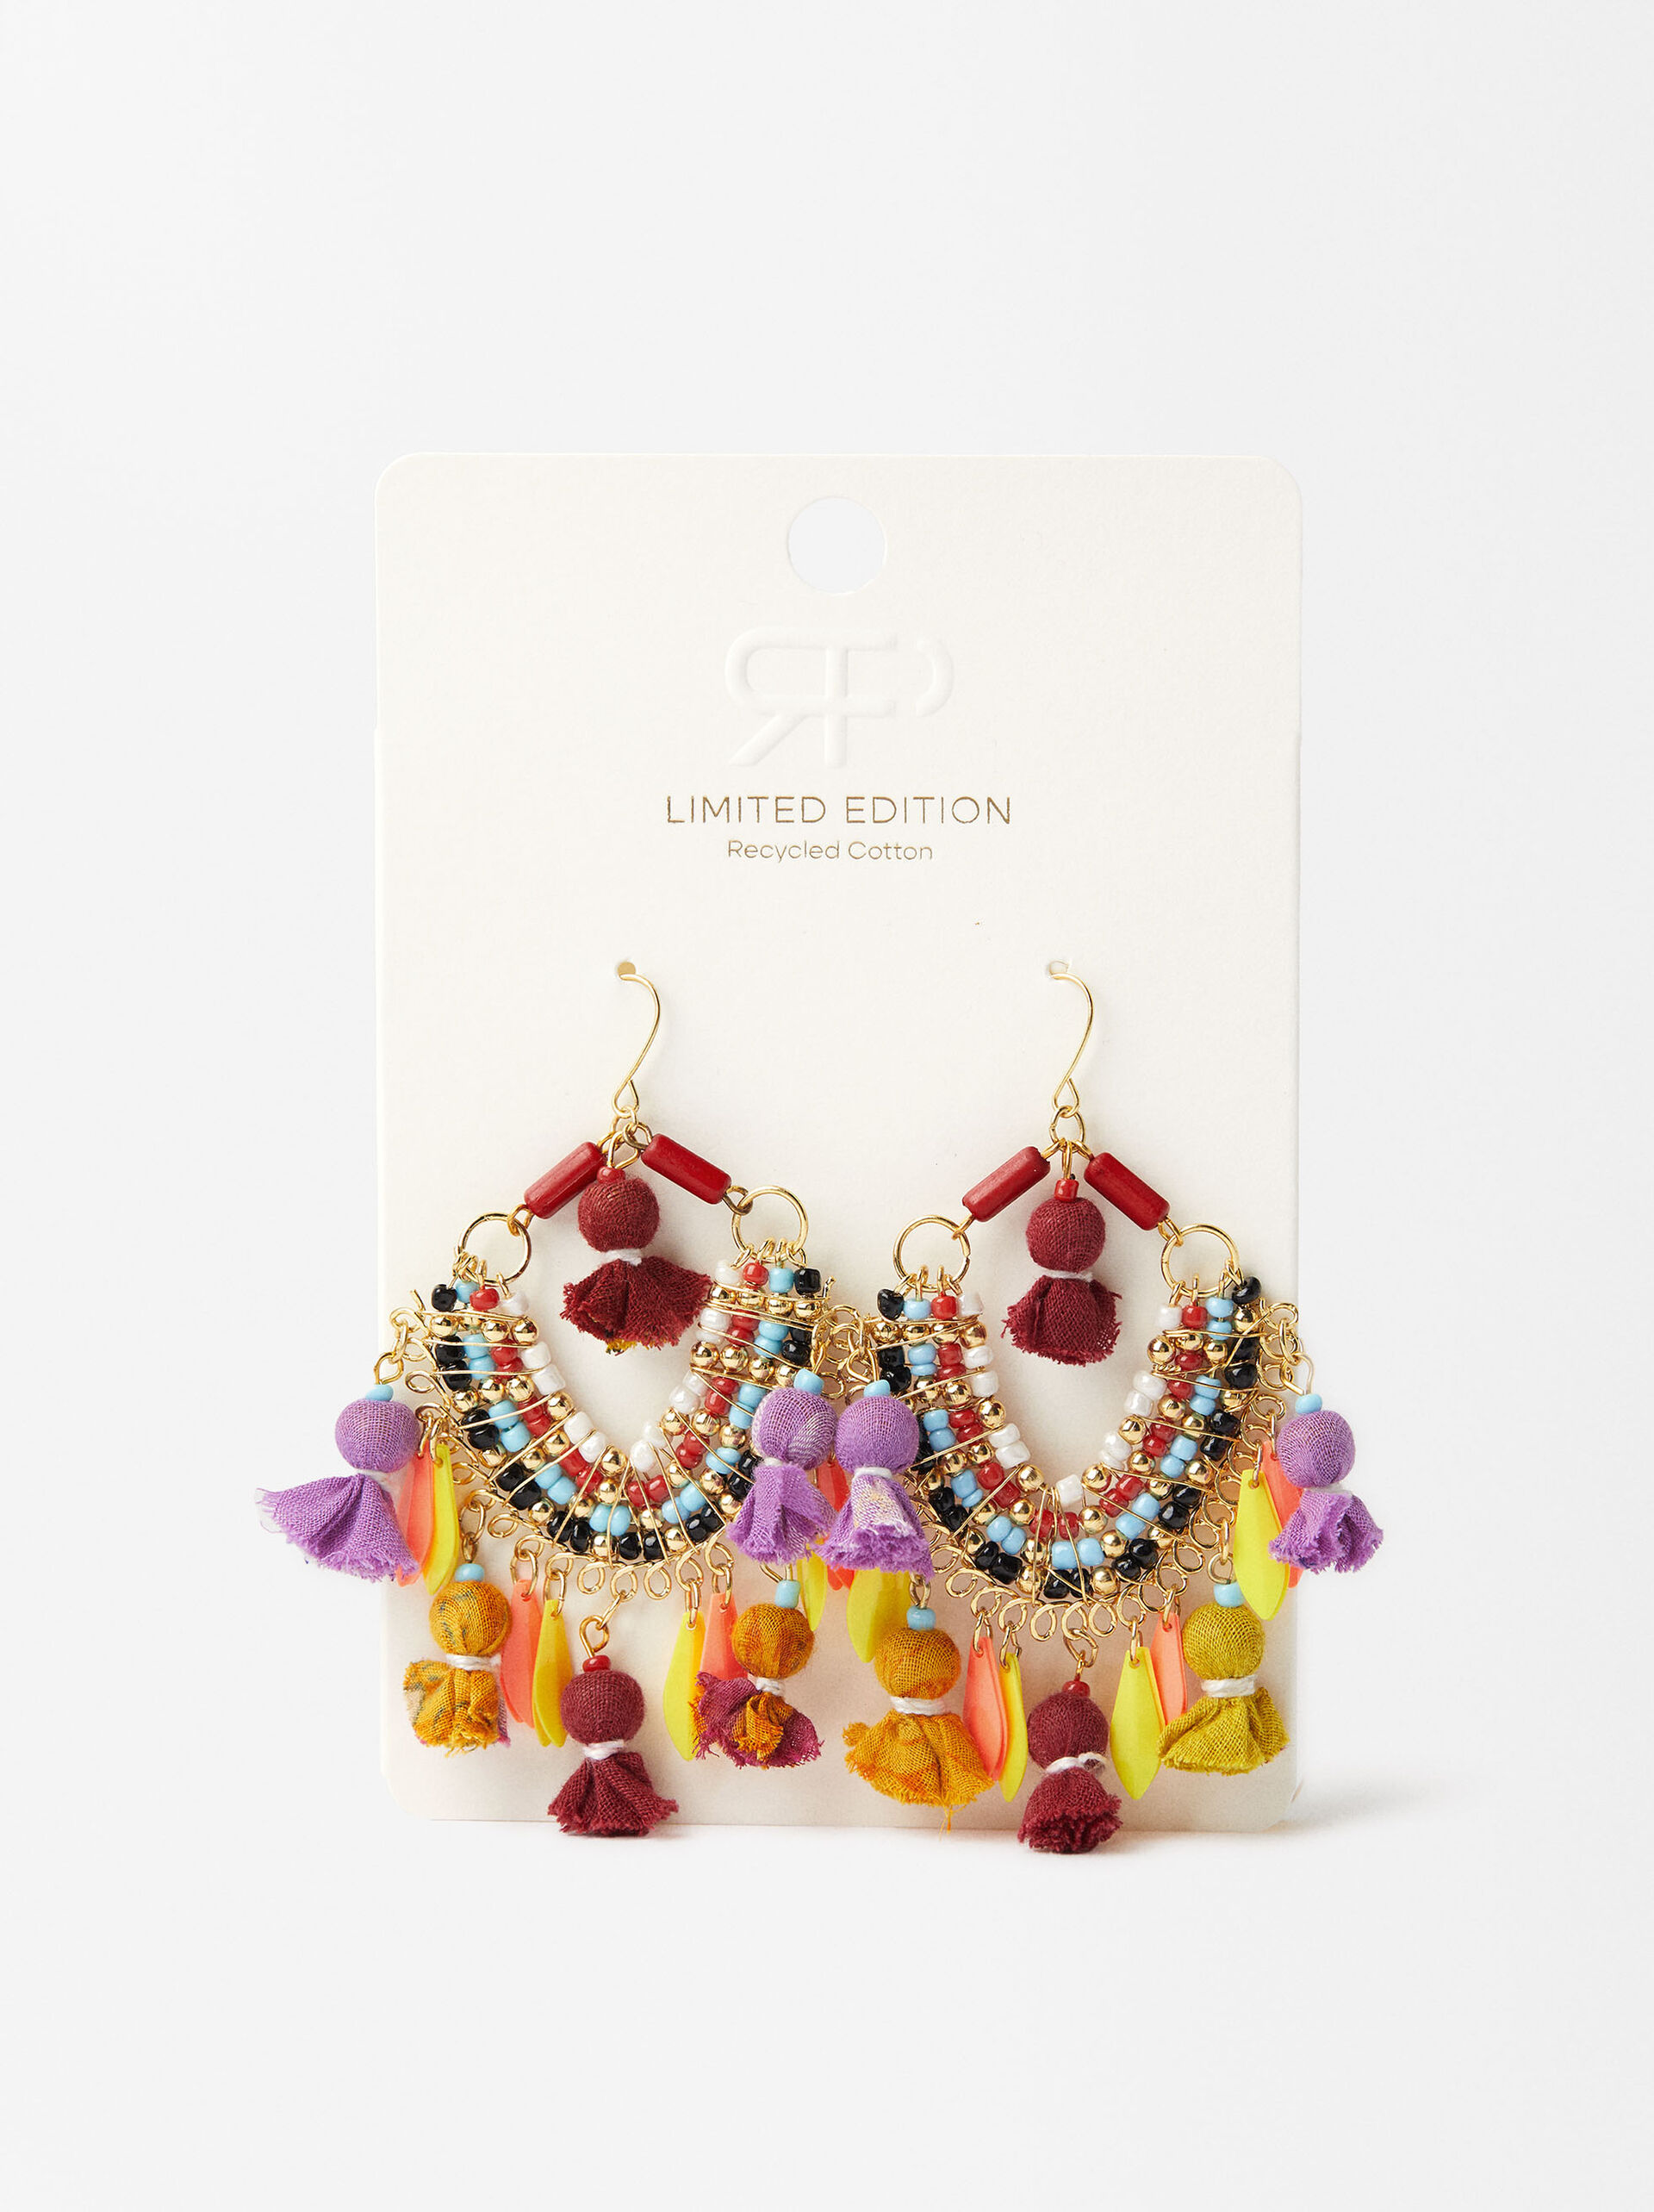 Recycled Cotton Petal Earrings - Limited Edition image number 3.0